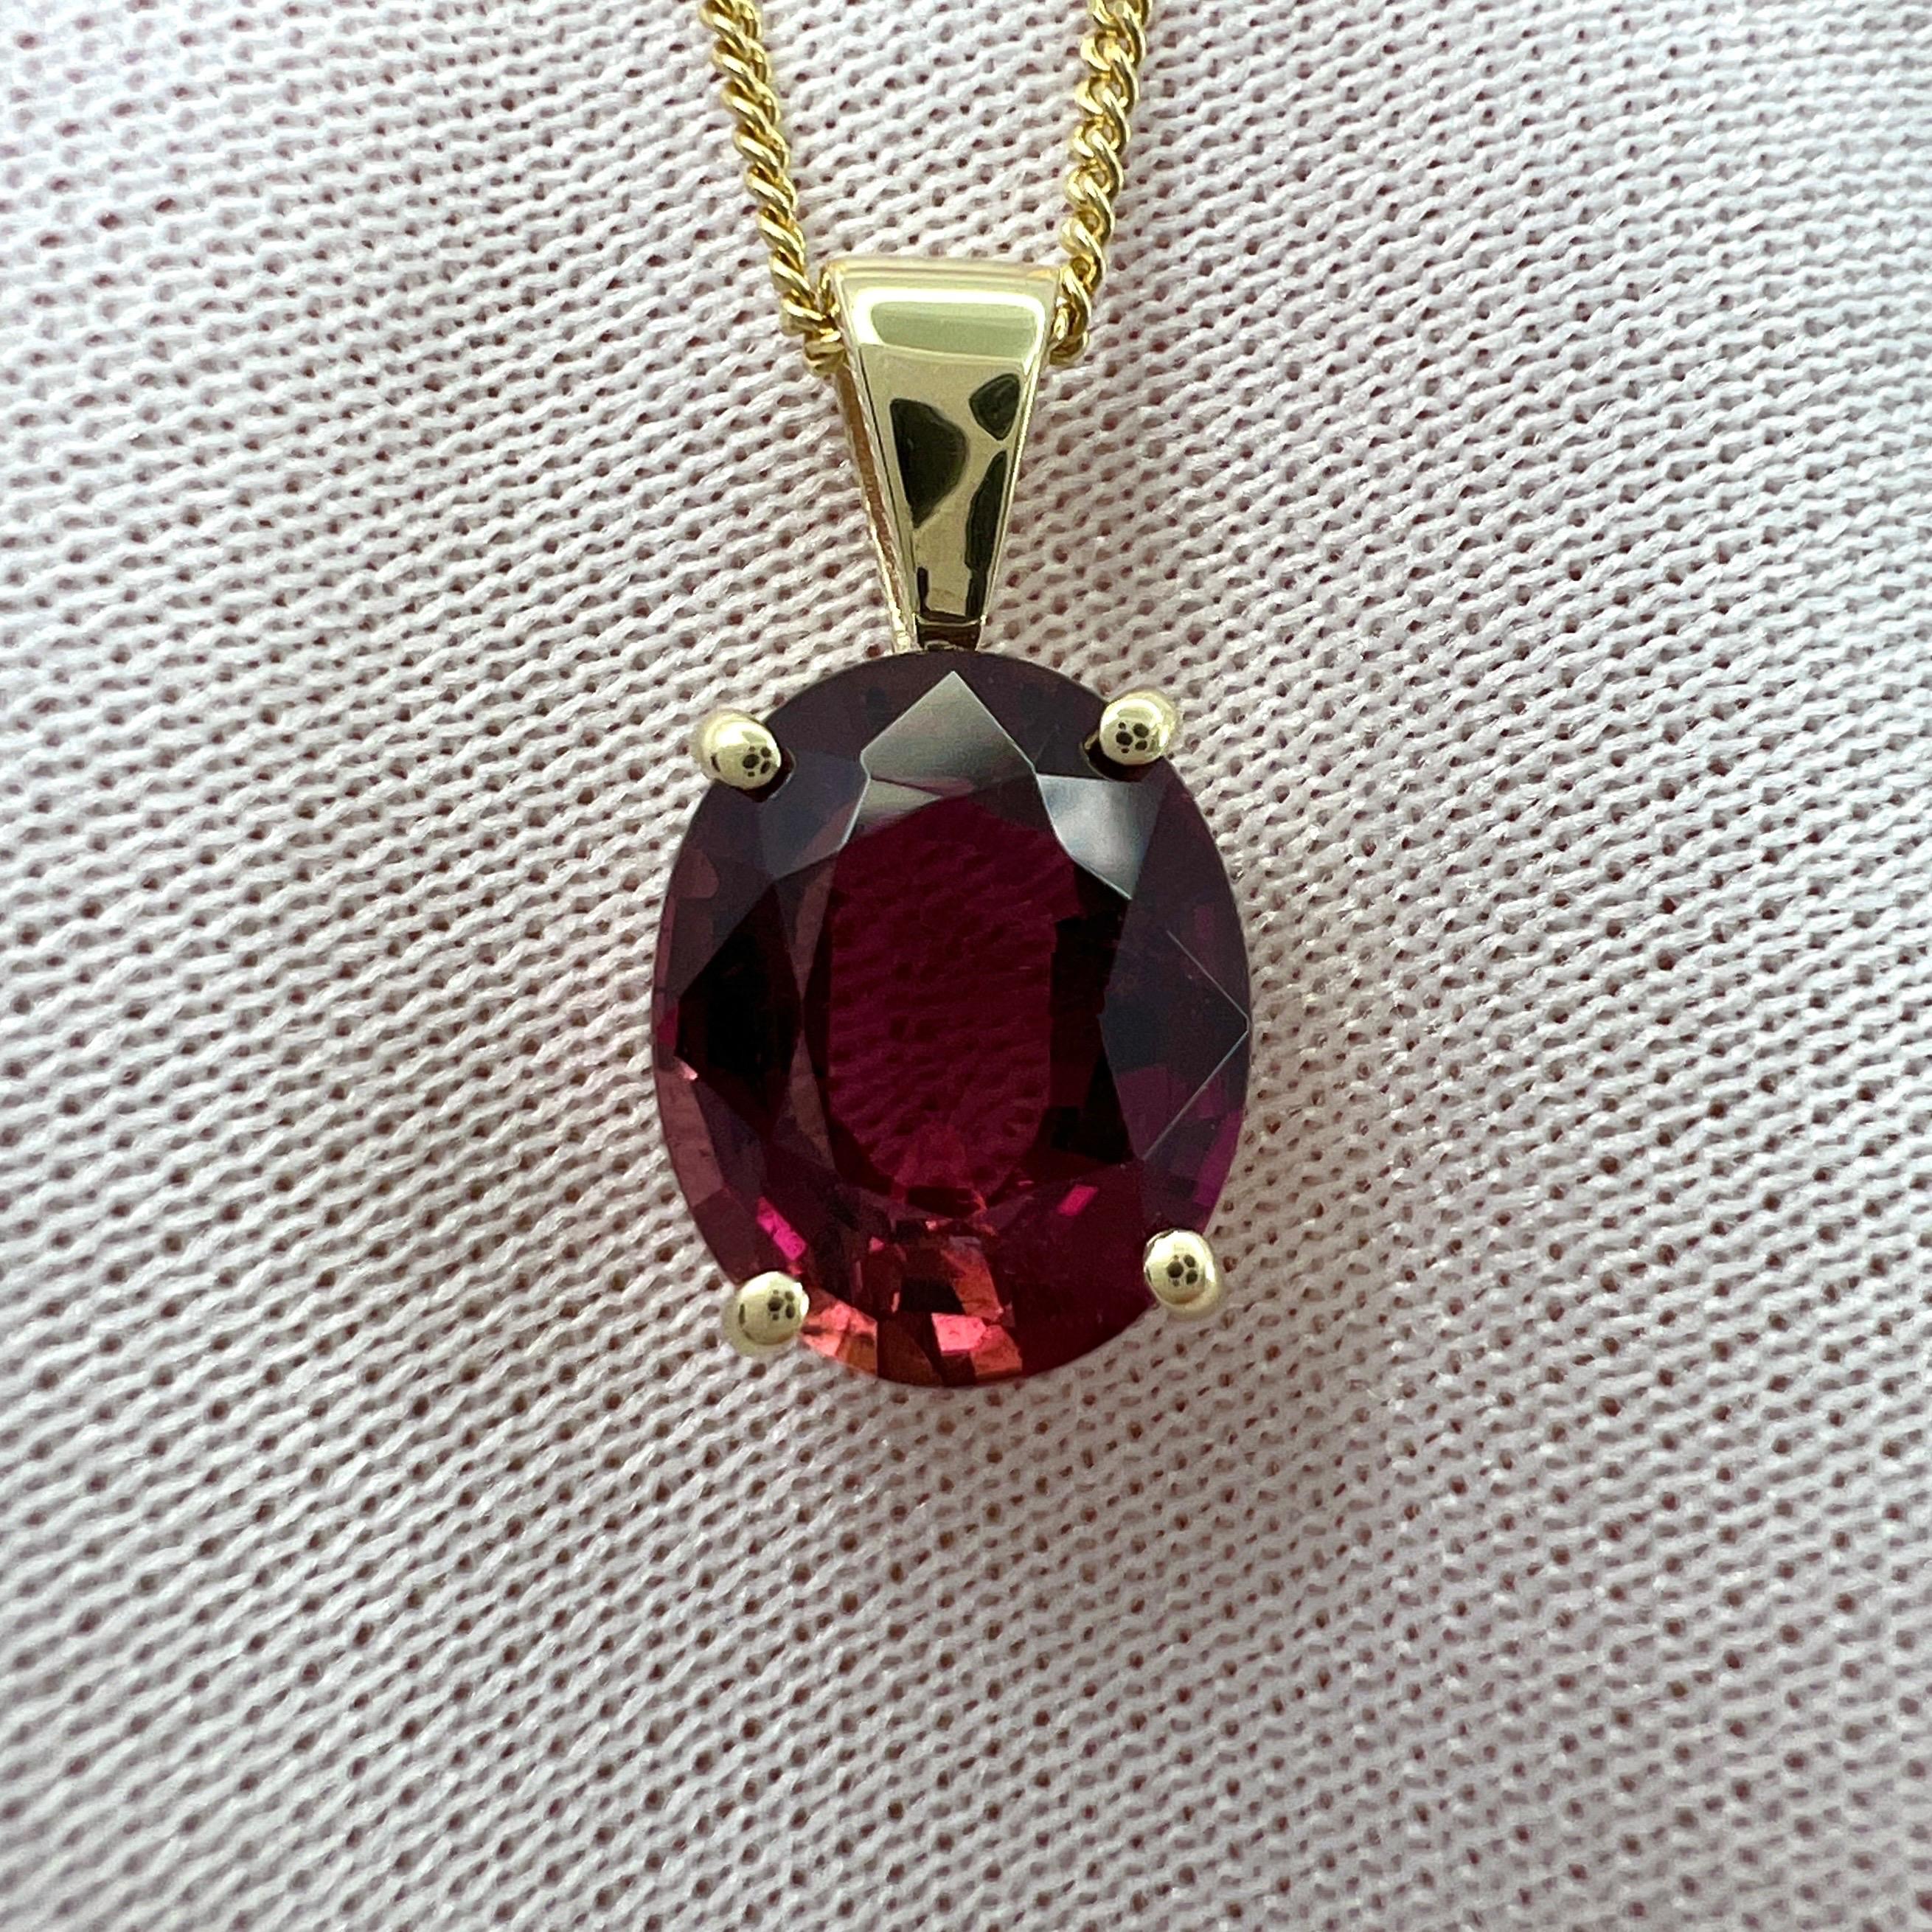 2.66ct Rubellite Tourmaline Pink Oval Cut 9k Yellow Gold Pendant Necklace For Sale 1